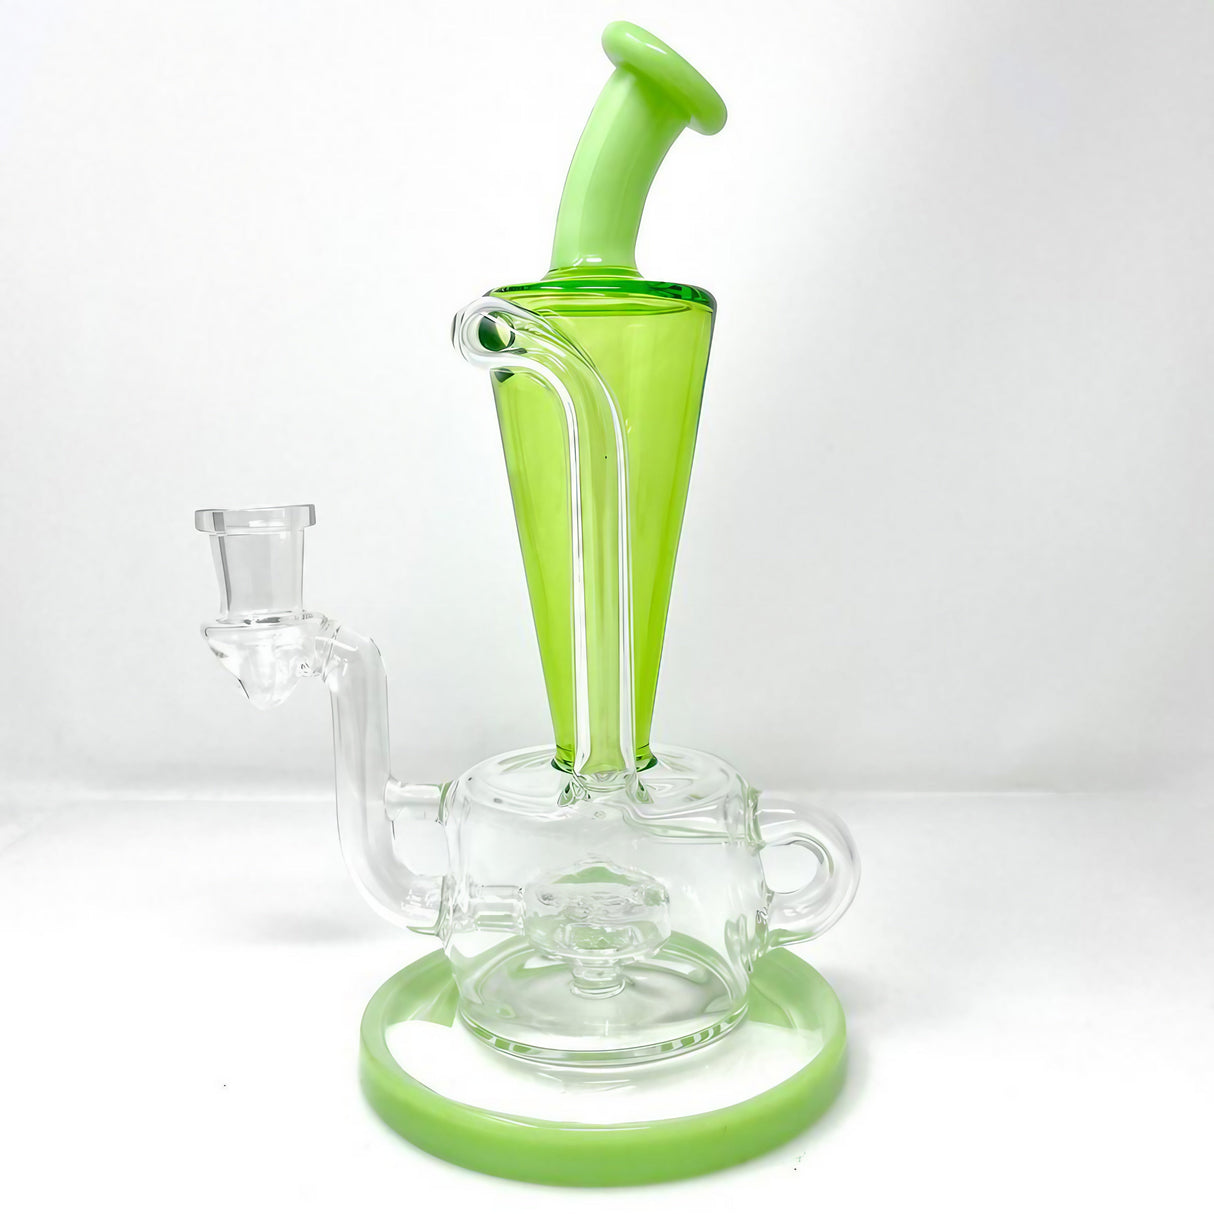 AFM Boomcycler 9" Dab Rig with Recycler Percolator - Front View on White Background